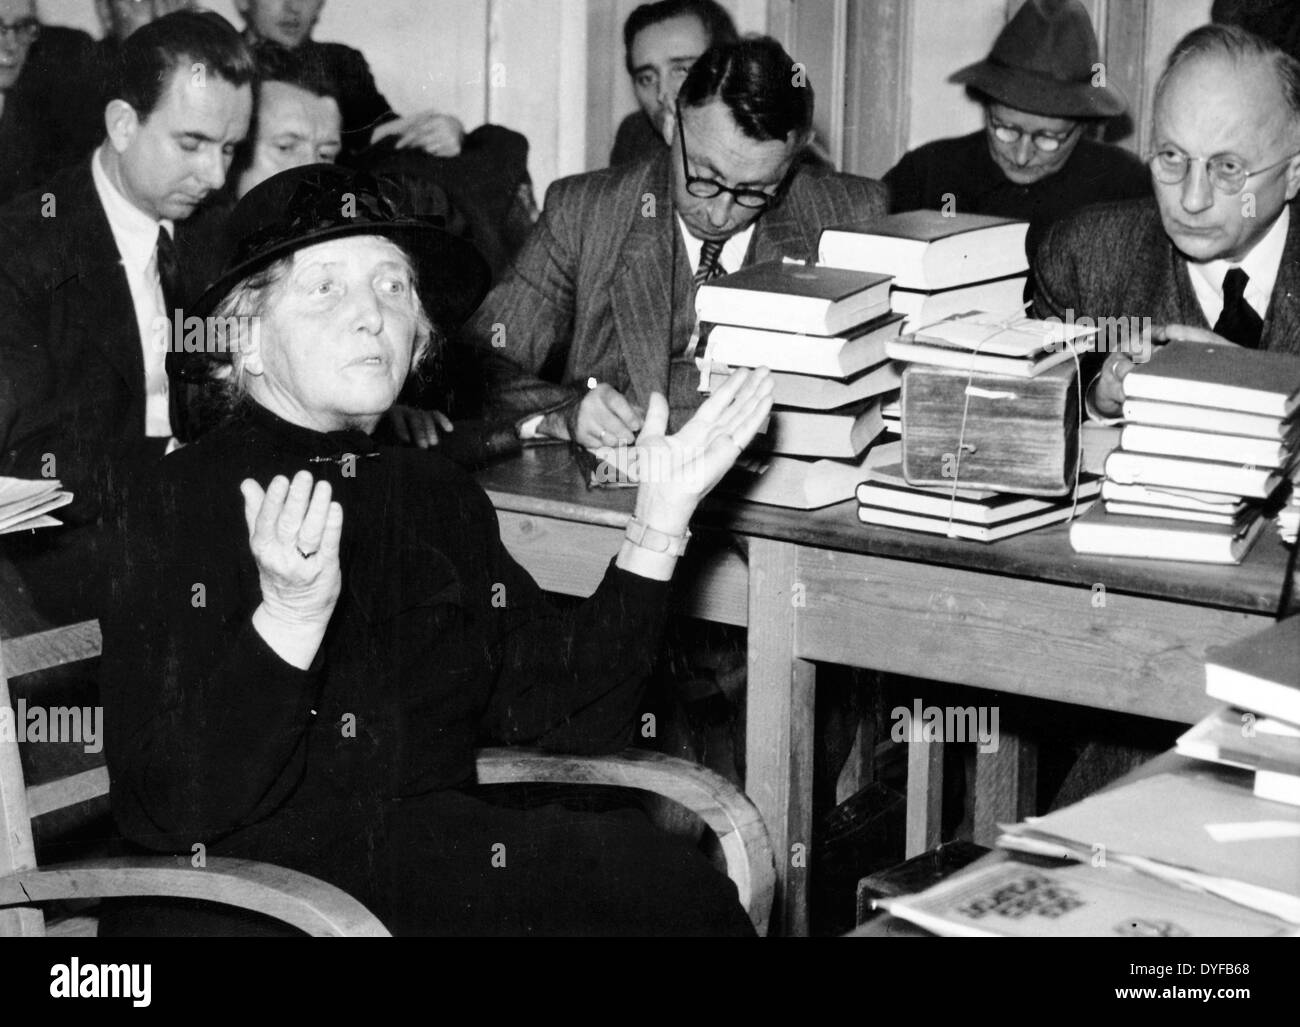 The widow of General Erich Ludendorff, Mathilda Ludendorff, during her defense at the Munich main chamber in Munich, Germany, 23 November 1949. As co-owner of Ludendorff publishers, she was accused as part of denazification of having supported the dissemination of antisemitic propaganda for the Nazi regime. In 1951, she was judged to be belong to the denazification group of 'Offenders' and was sentenced to one year of reconstruction work, 50 percent of assets were confiscated for reparation purposes and a seven-year occupational ban. Photo: Berliner Verlag/Archive - NO WIRE SERVICE Stock Photo